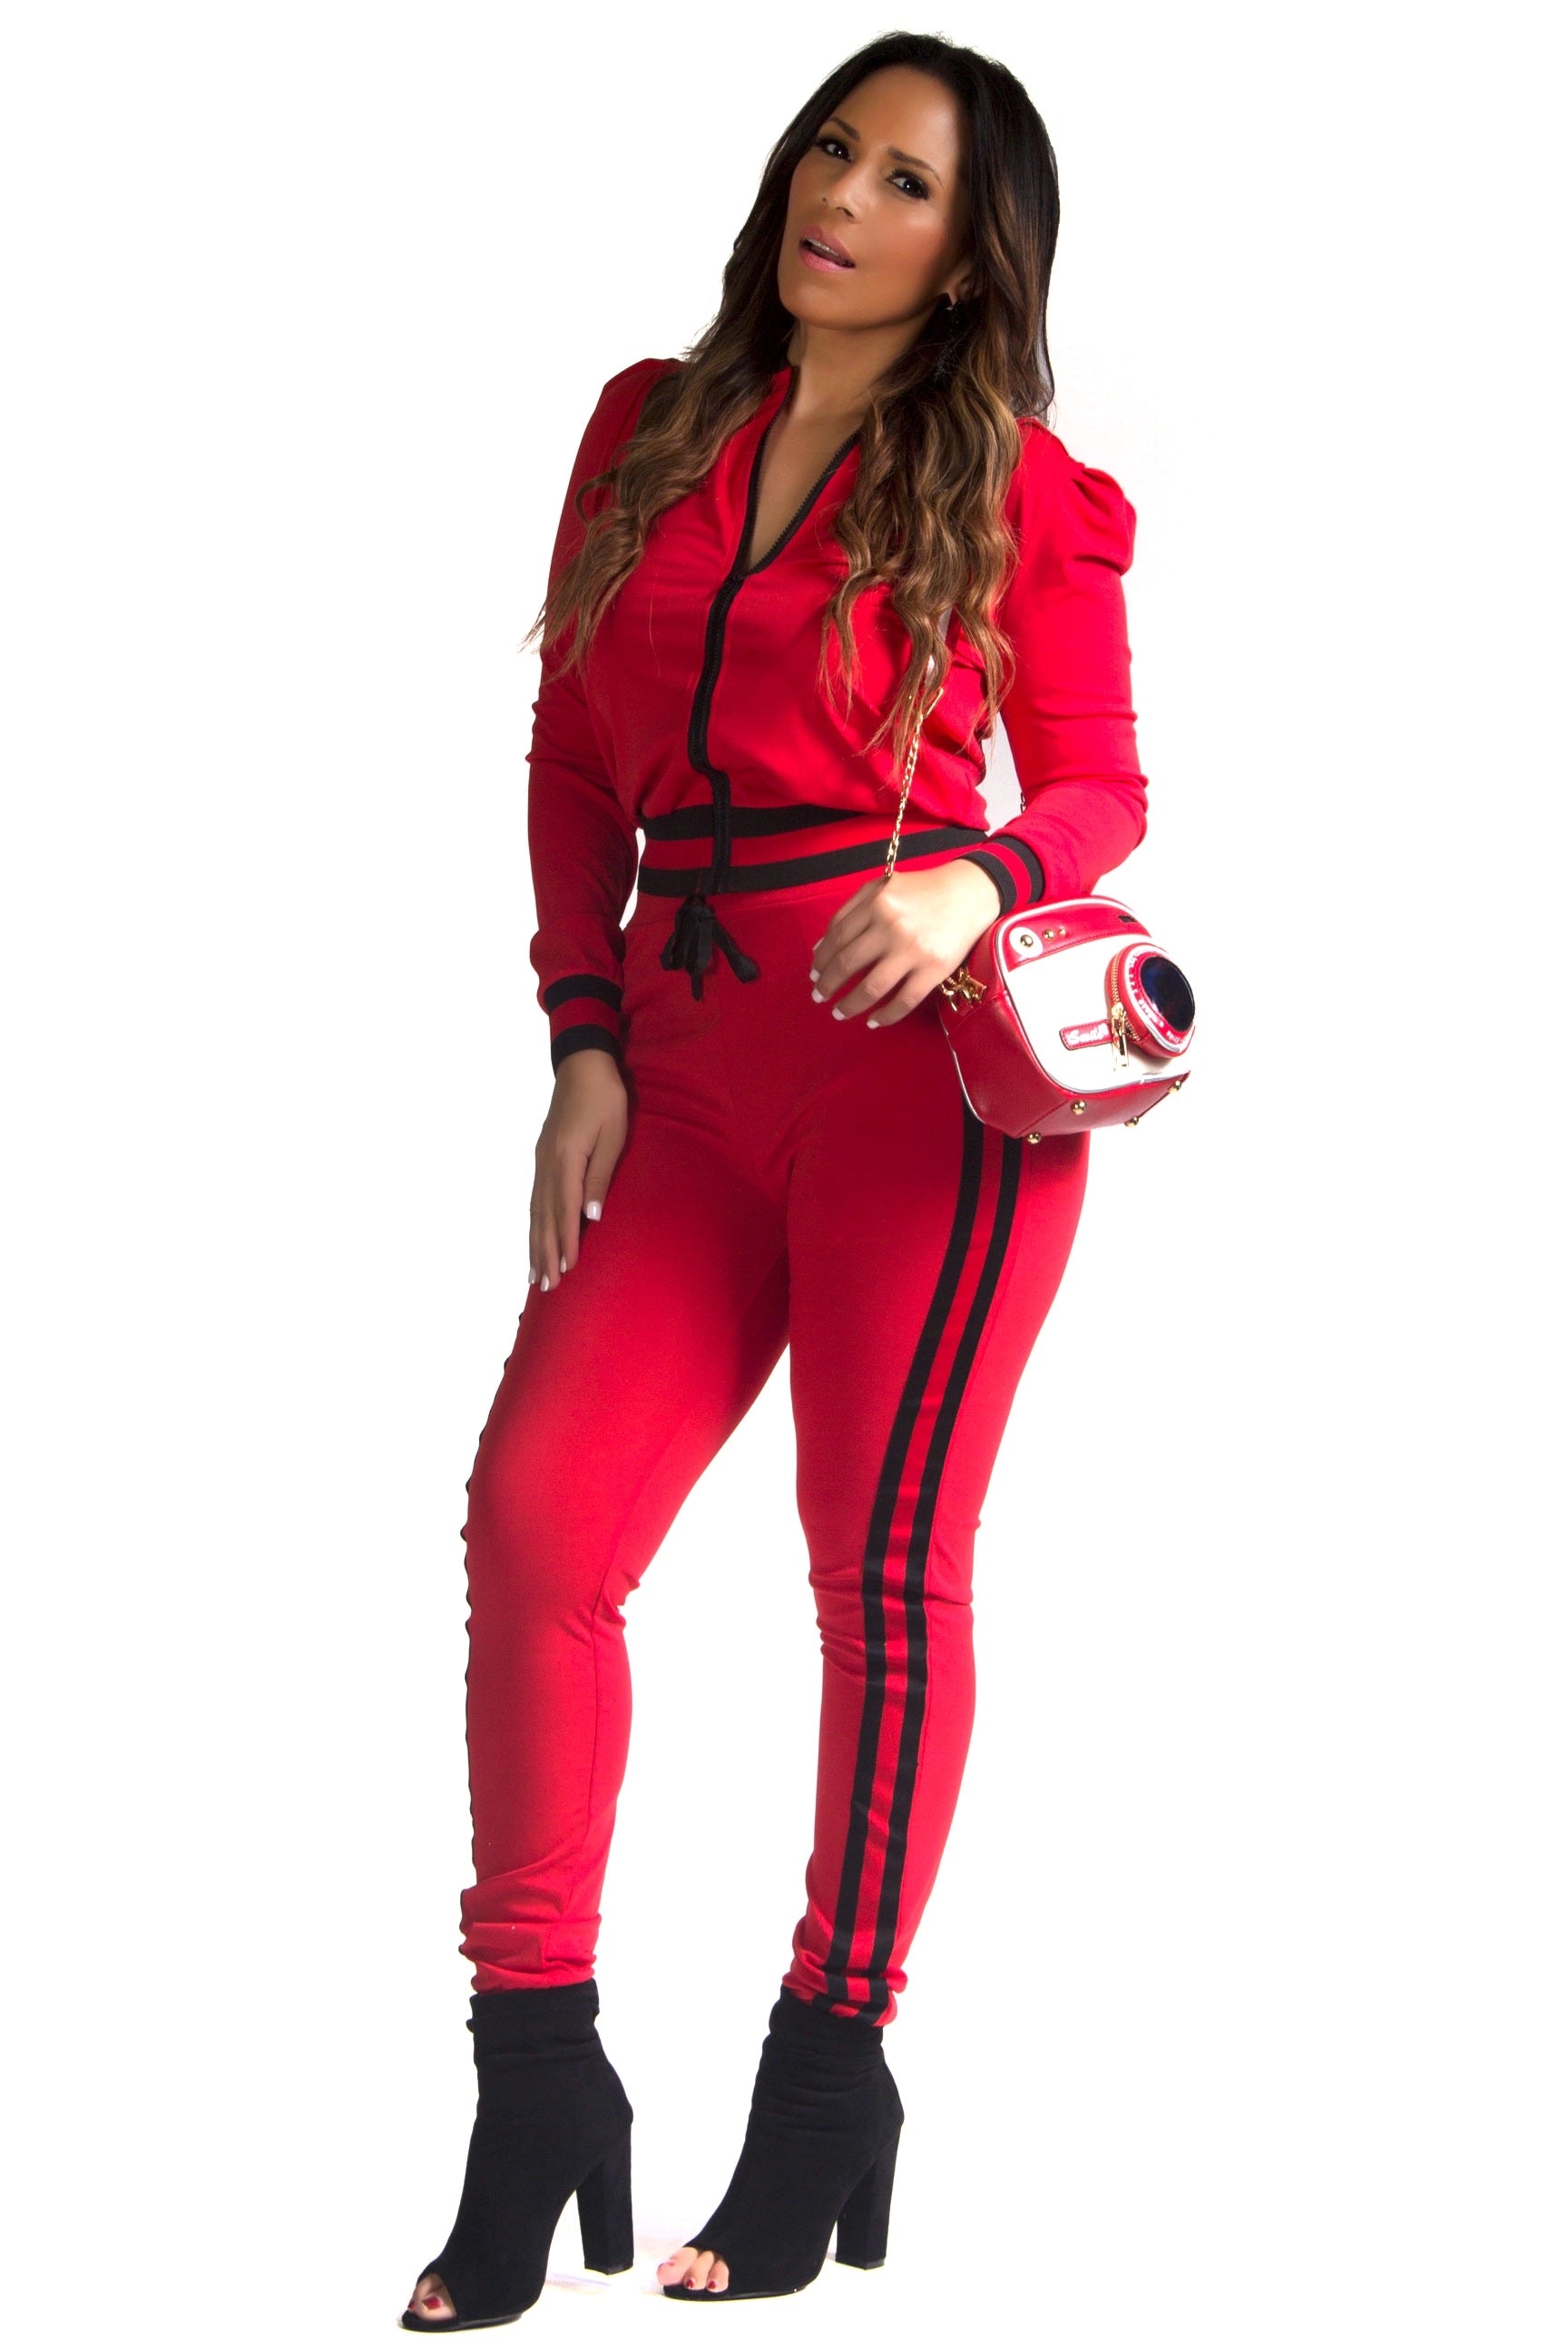 Catalina 2 Piece Long Sleeve Zipper Jacket and Pants Tracksuit - MY SEXY STYLES